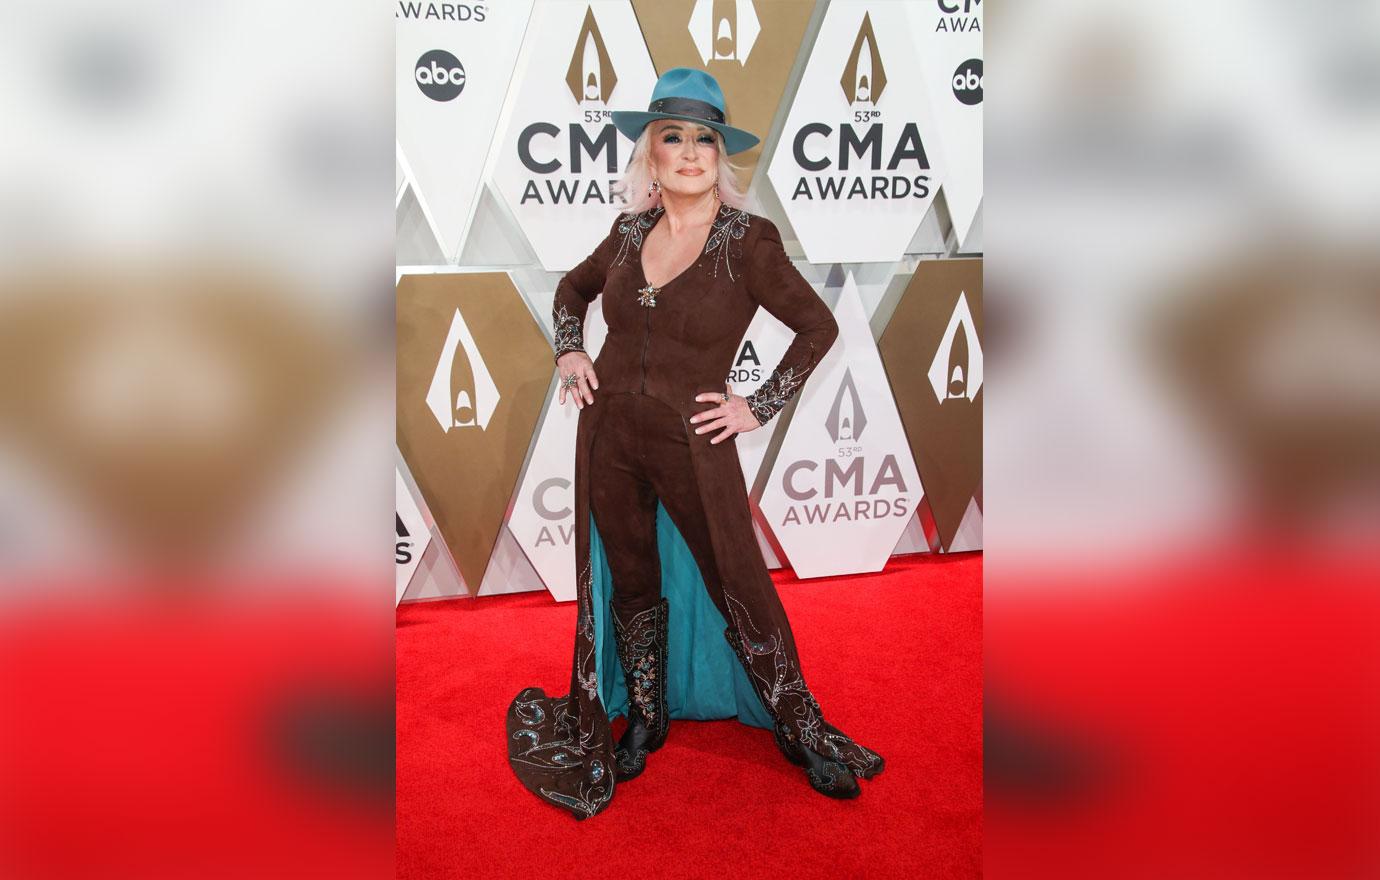 The Best & Worst Dressed At The CMA Awards 2019